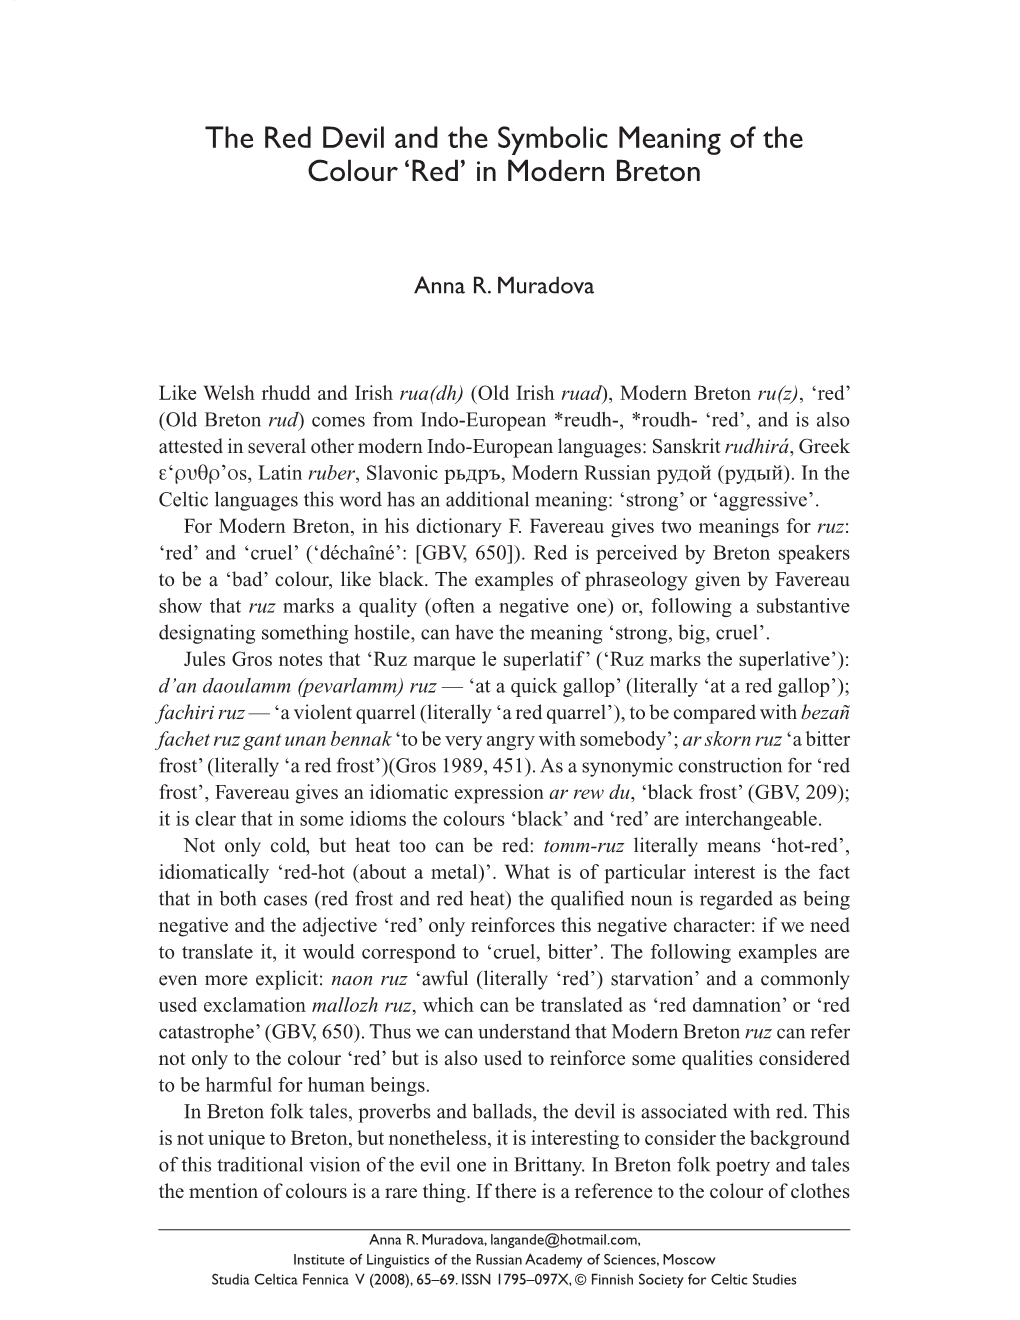 The Red Devil and the Symbolic Meaning of the Colour 'Red' in Modern Breton